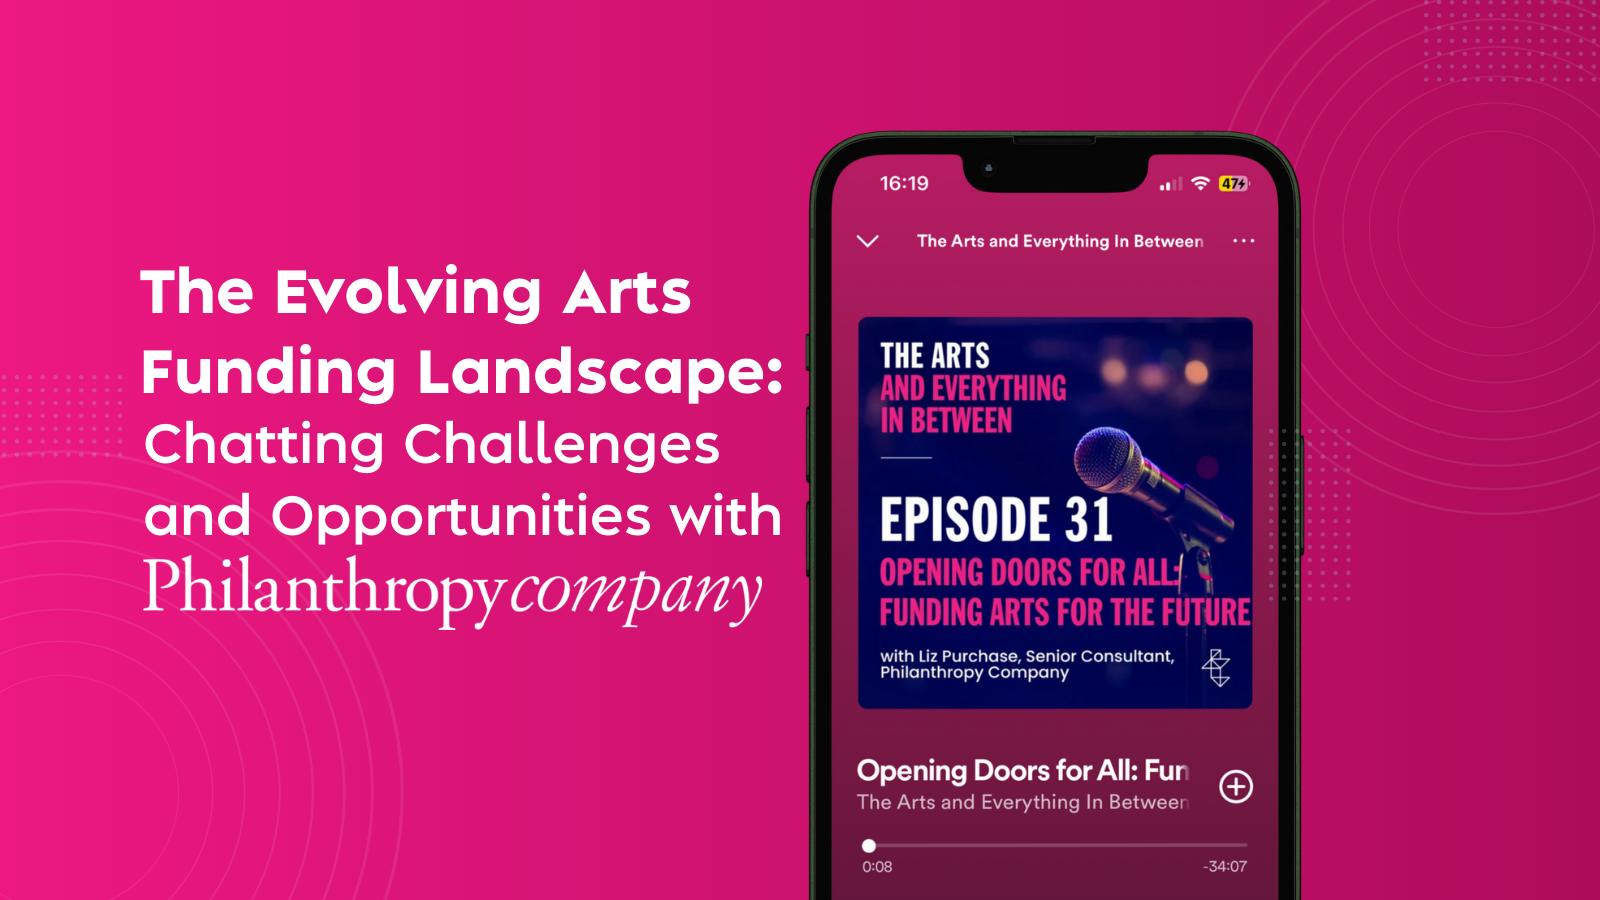 The Evolving Arts Funding Landscape: Chatting Challenges and Opportunities with Philanthropy Company